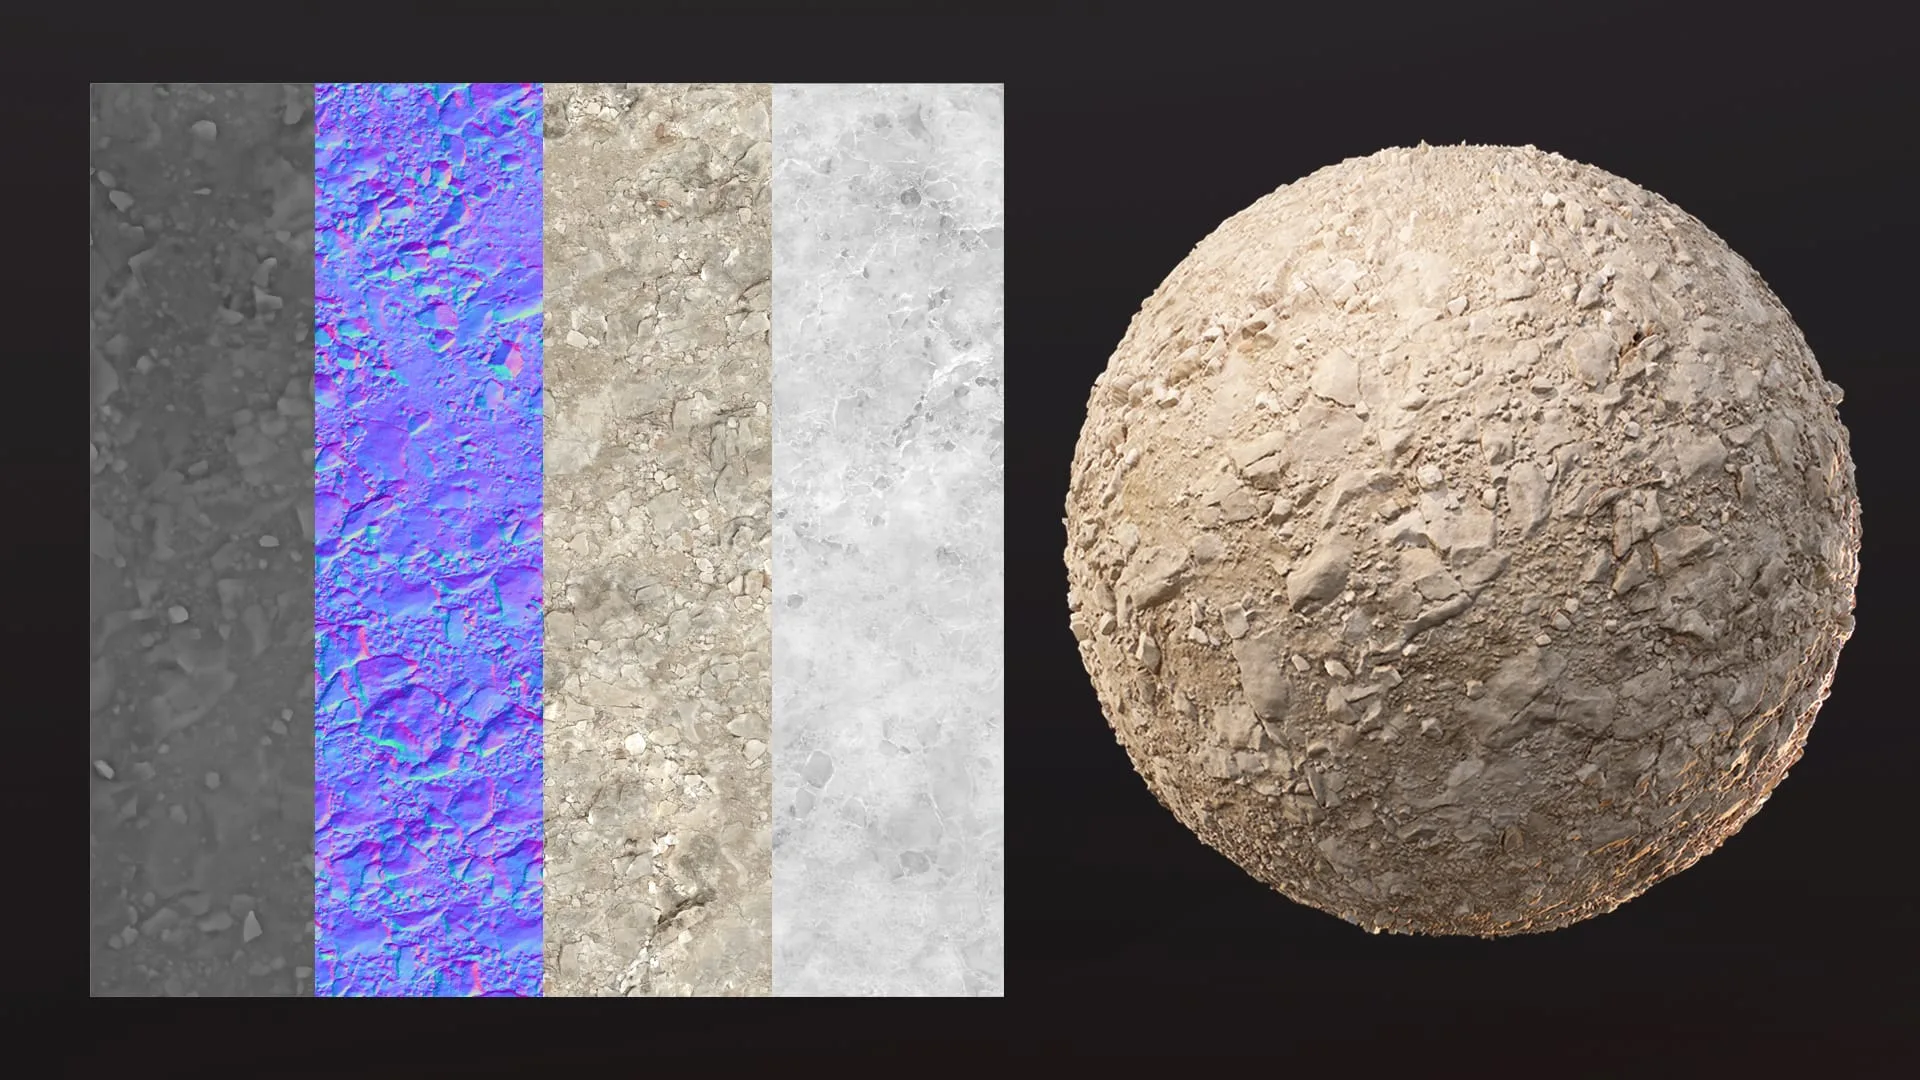 Rocky Ground - Photogrammetry Material